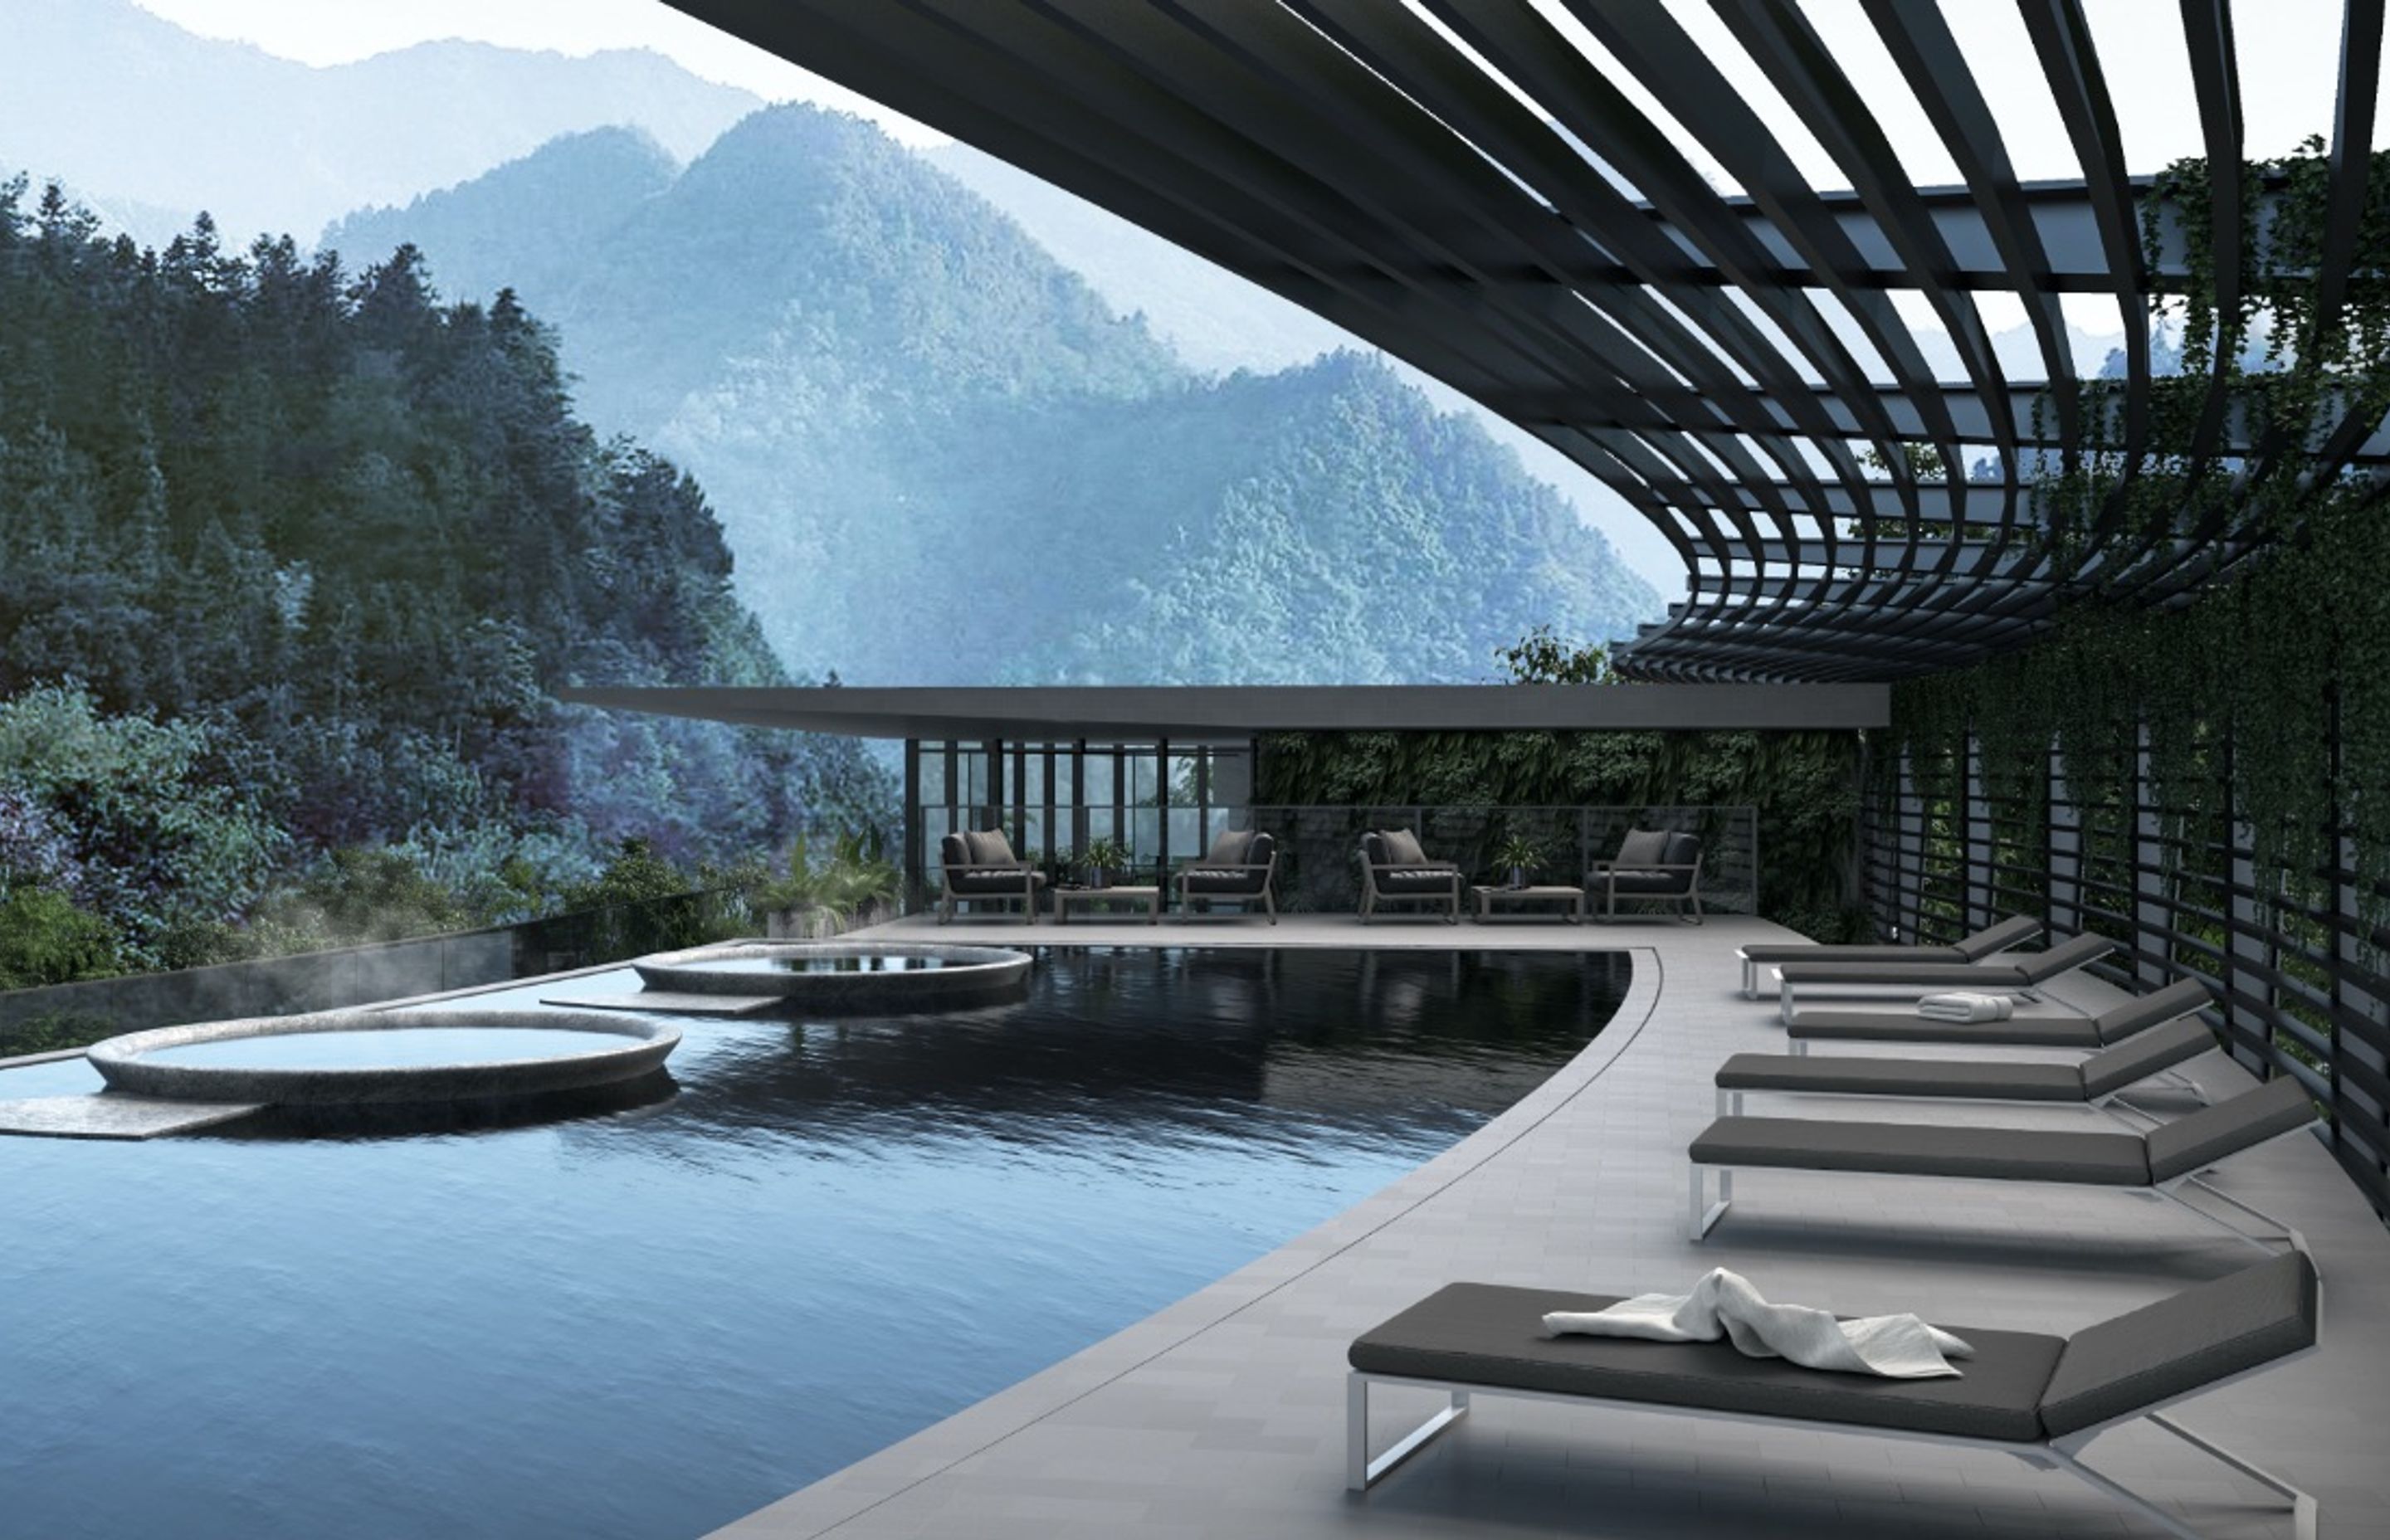 The hot spring spa and swimming pool integrates the wonders of Huangshan landscape into the hotel while providing guests a place of tranquillity, rest and relaxation.